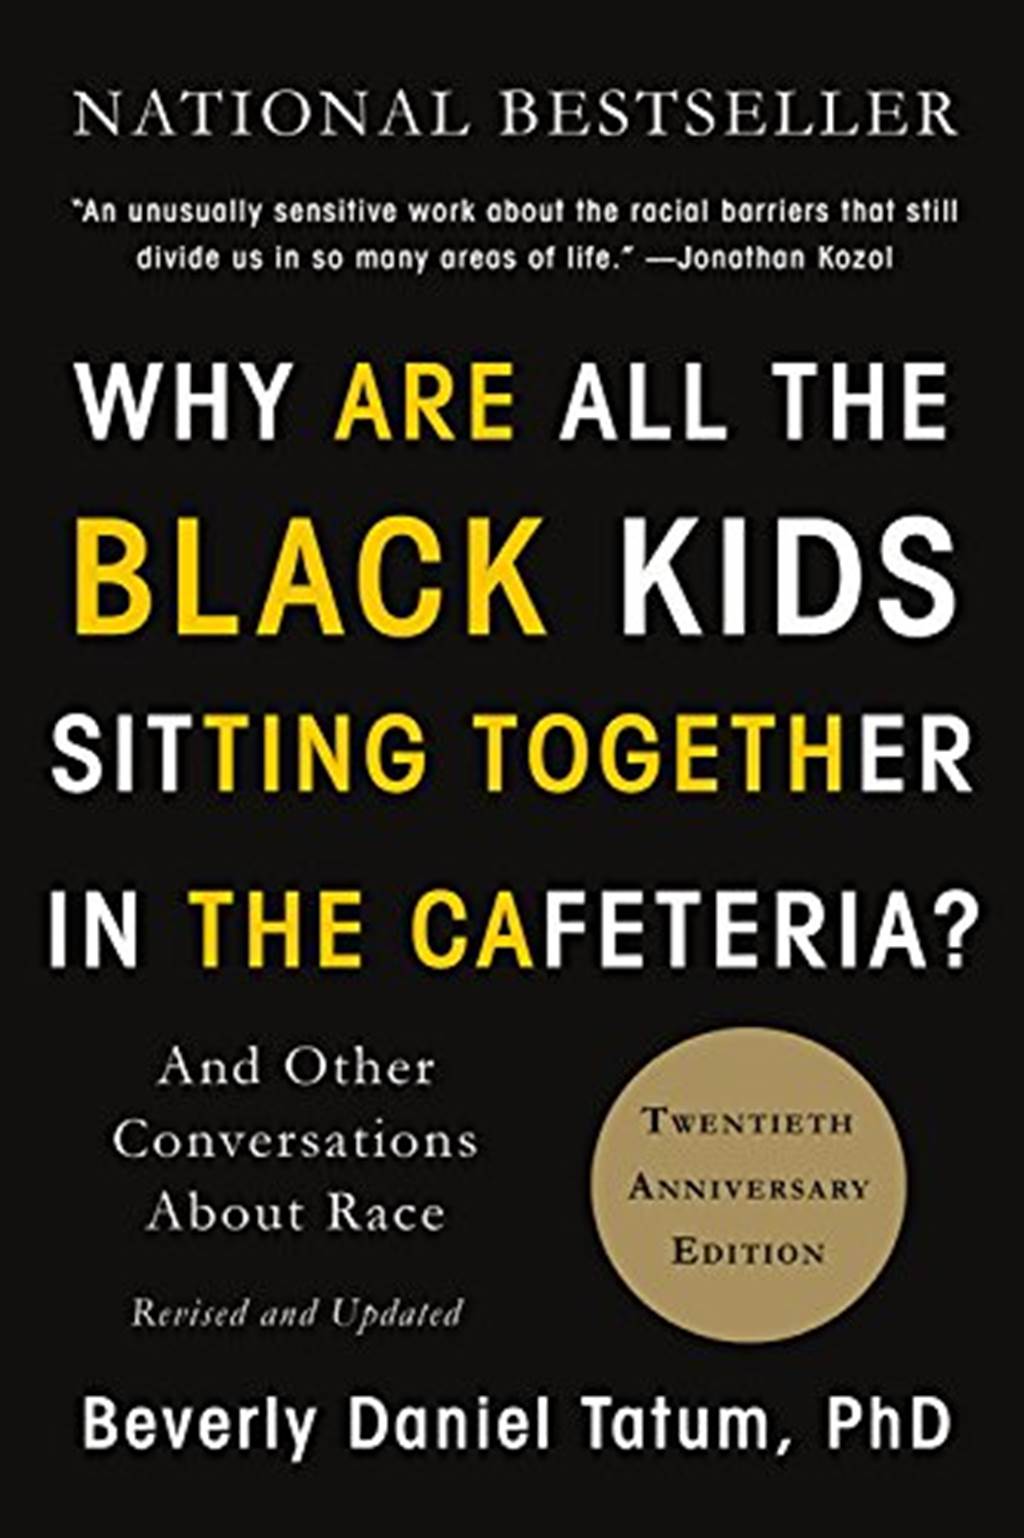 why are all the black kids sitting together in the cafeteria book cover